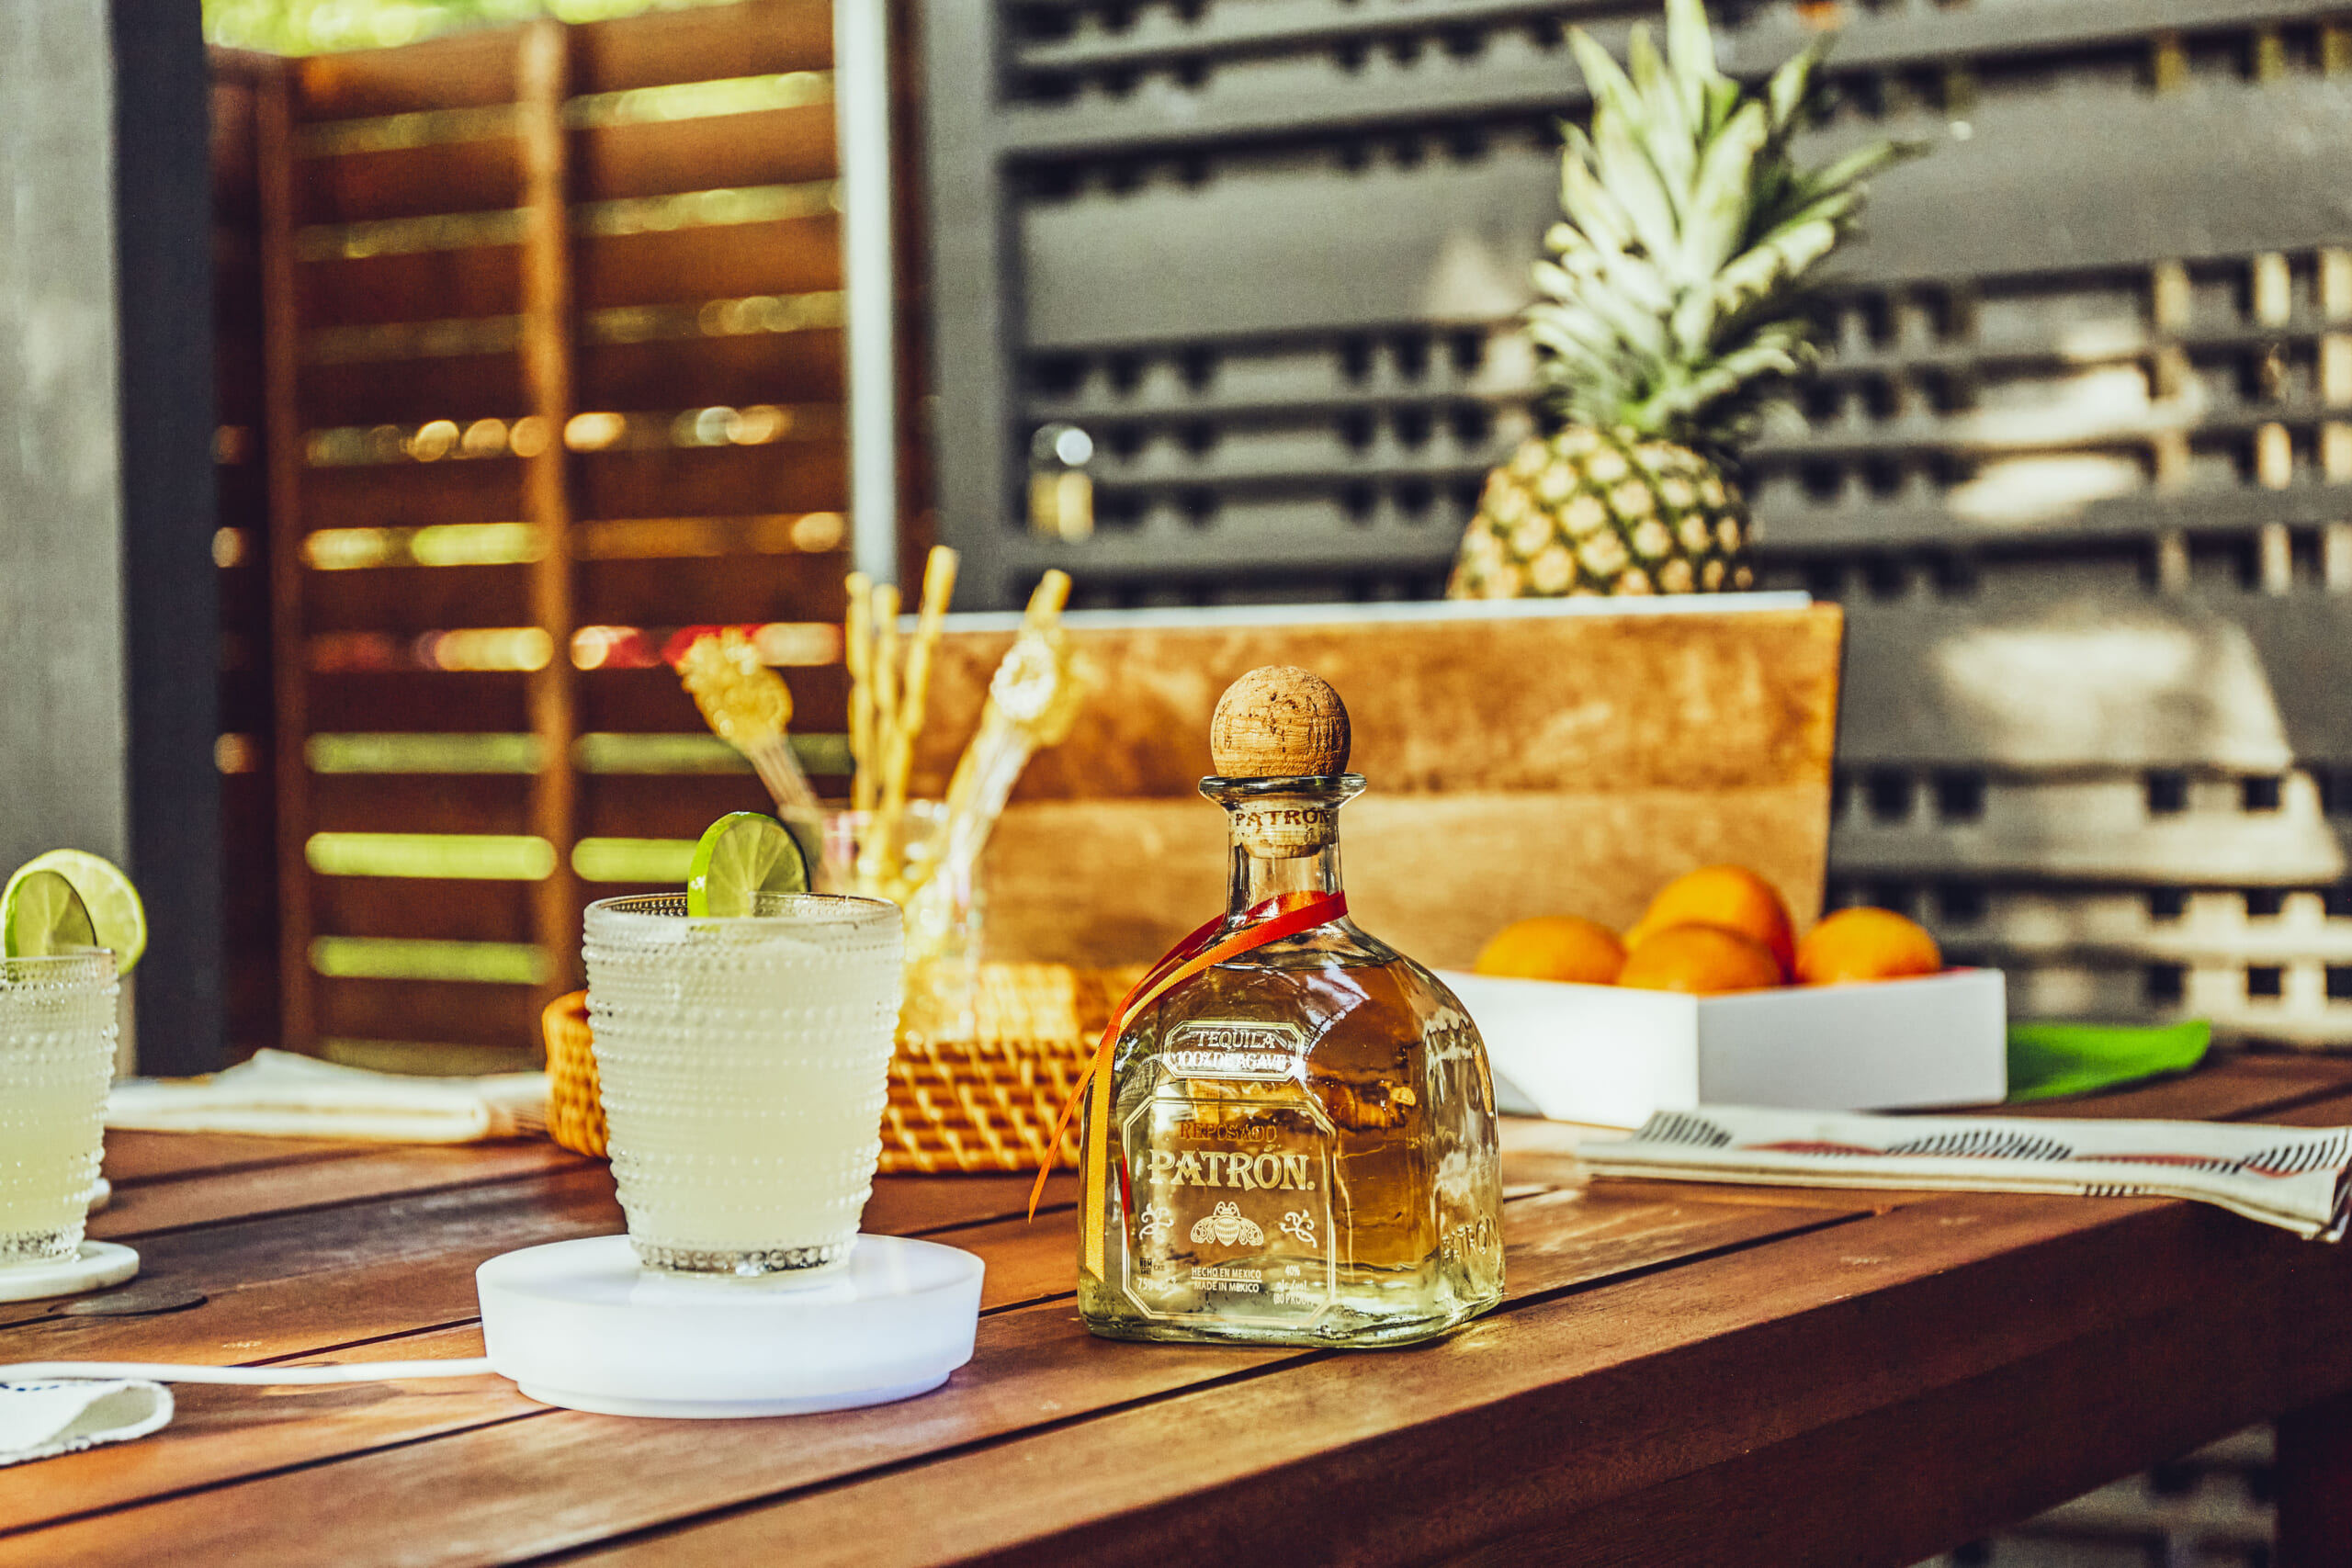 Make The Perfect Margarita With This Smart Coaster From Patrón and